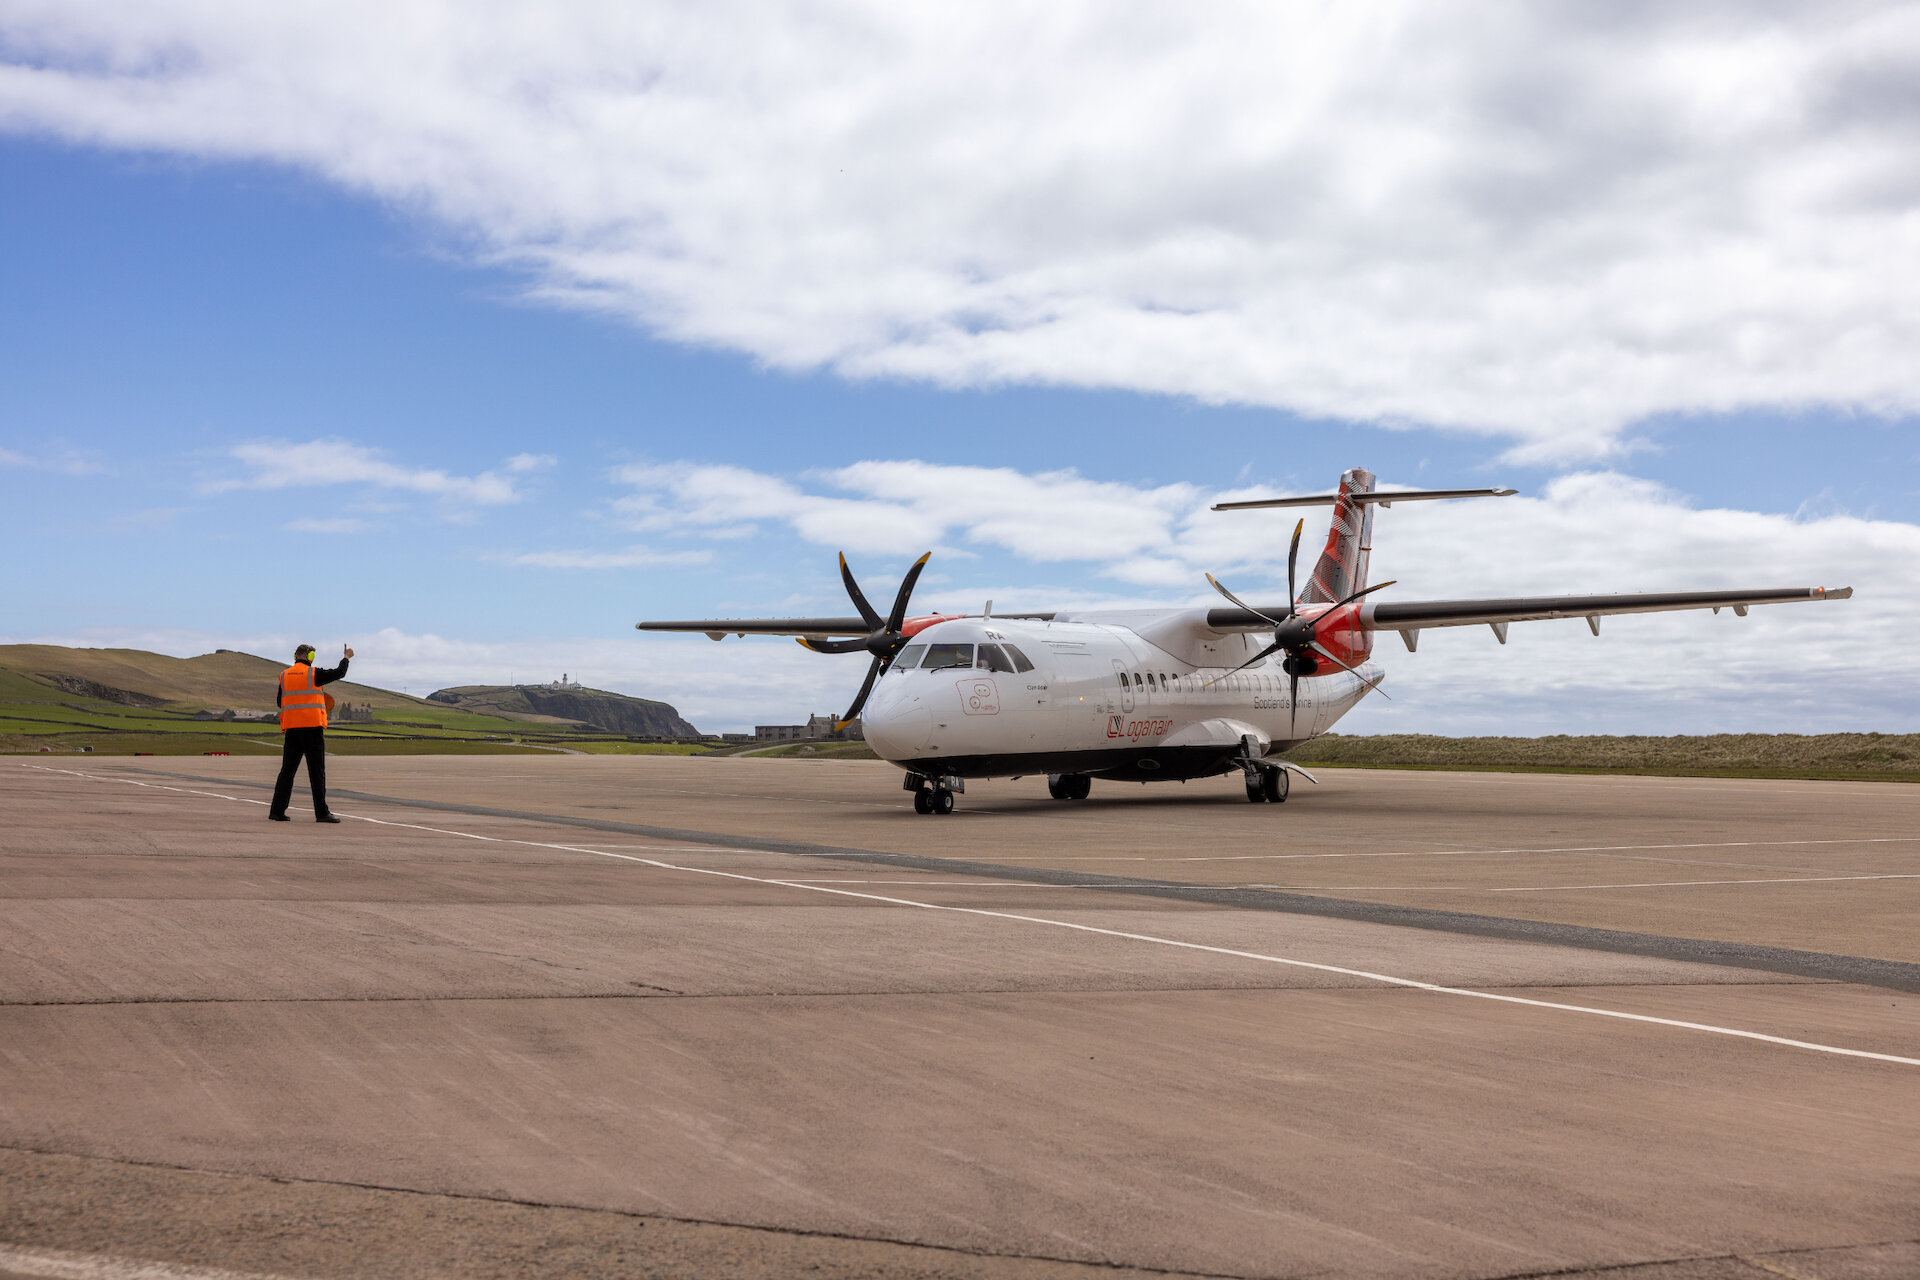 The maiden flight of Loganair's ATR aircraft travelling from London Heathrow arrives at Sumburgh Airport in Shetland. | Loganair